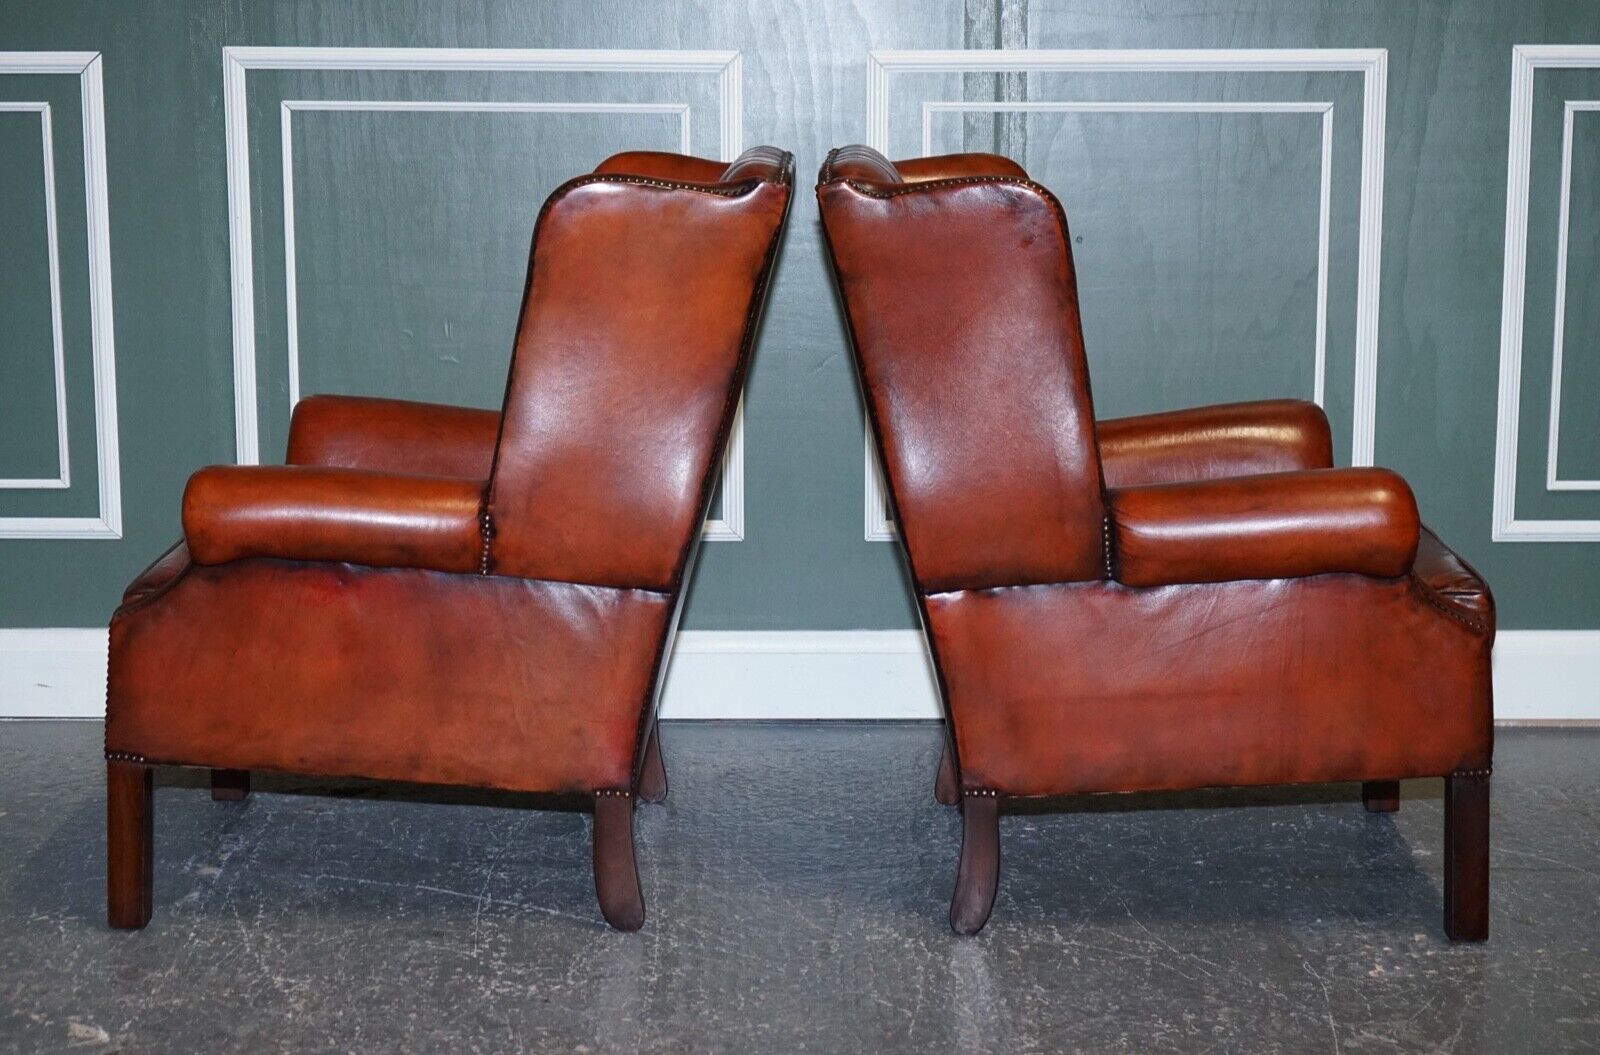 STUNNING PAIR OF BURGUNDY BROWN LEATHER HAND DYED WINGBACK CHAIRS